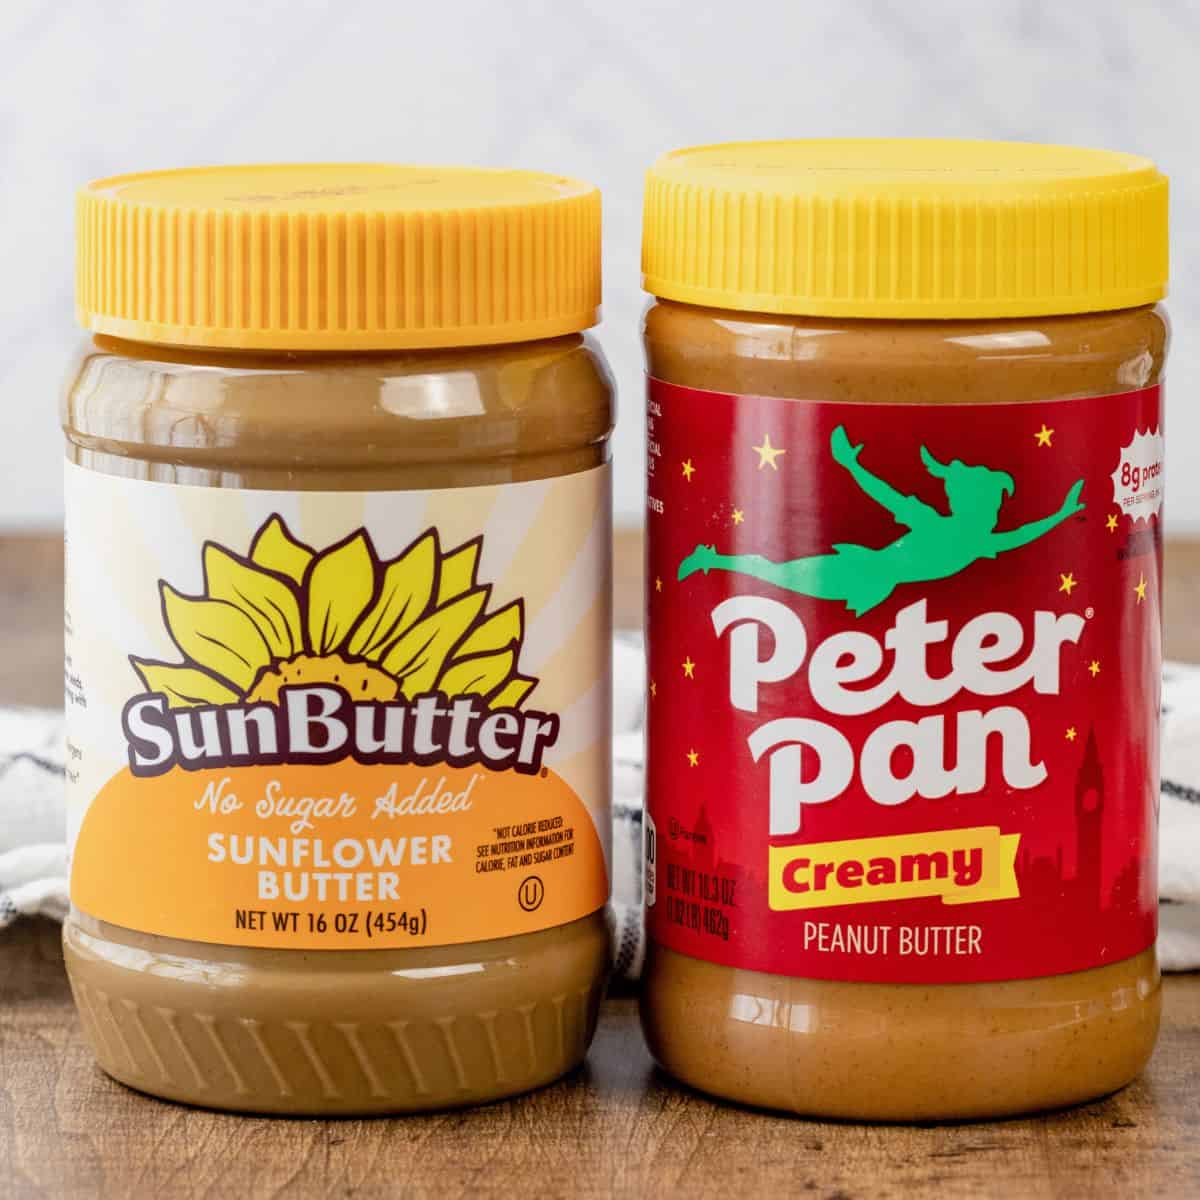 A jar of SunButter next to a jar of Peanut Butter on the wood tabletop in the kitchen.